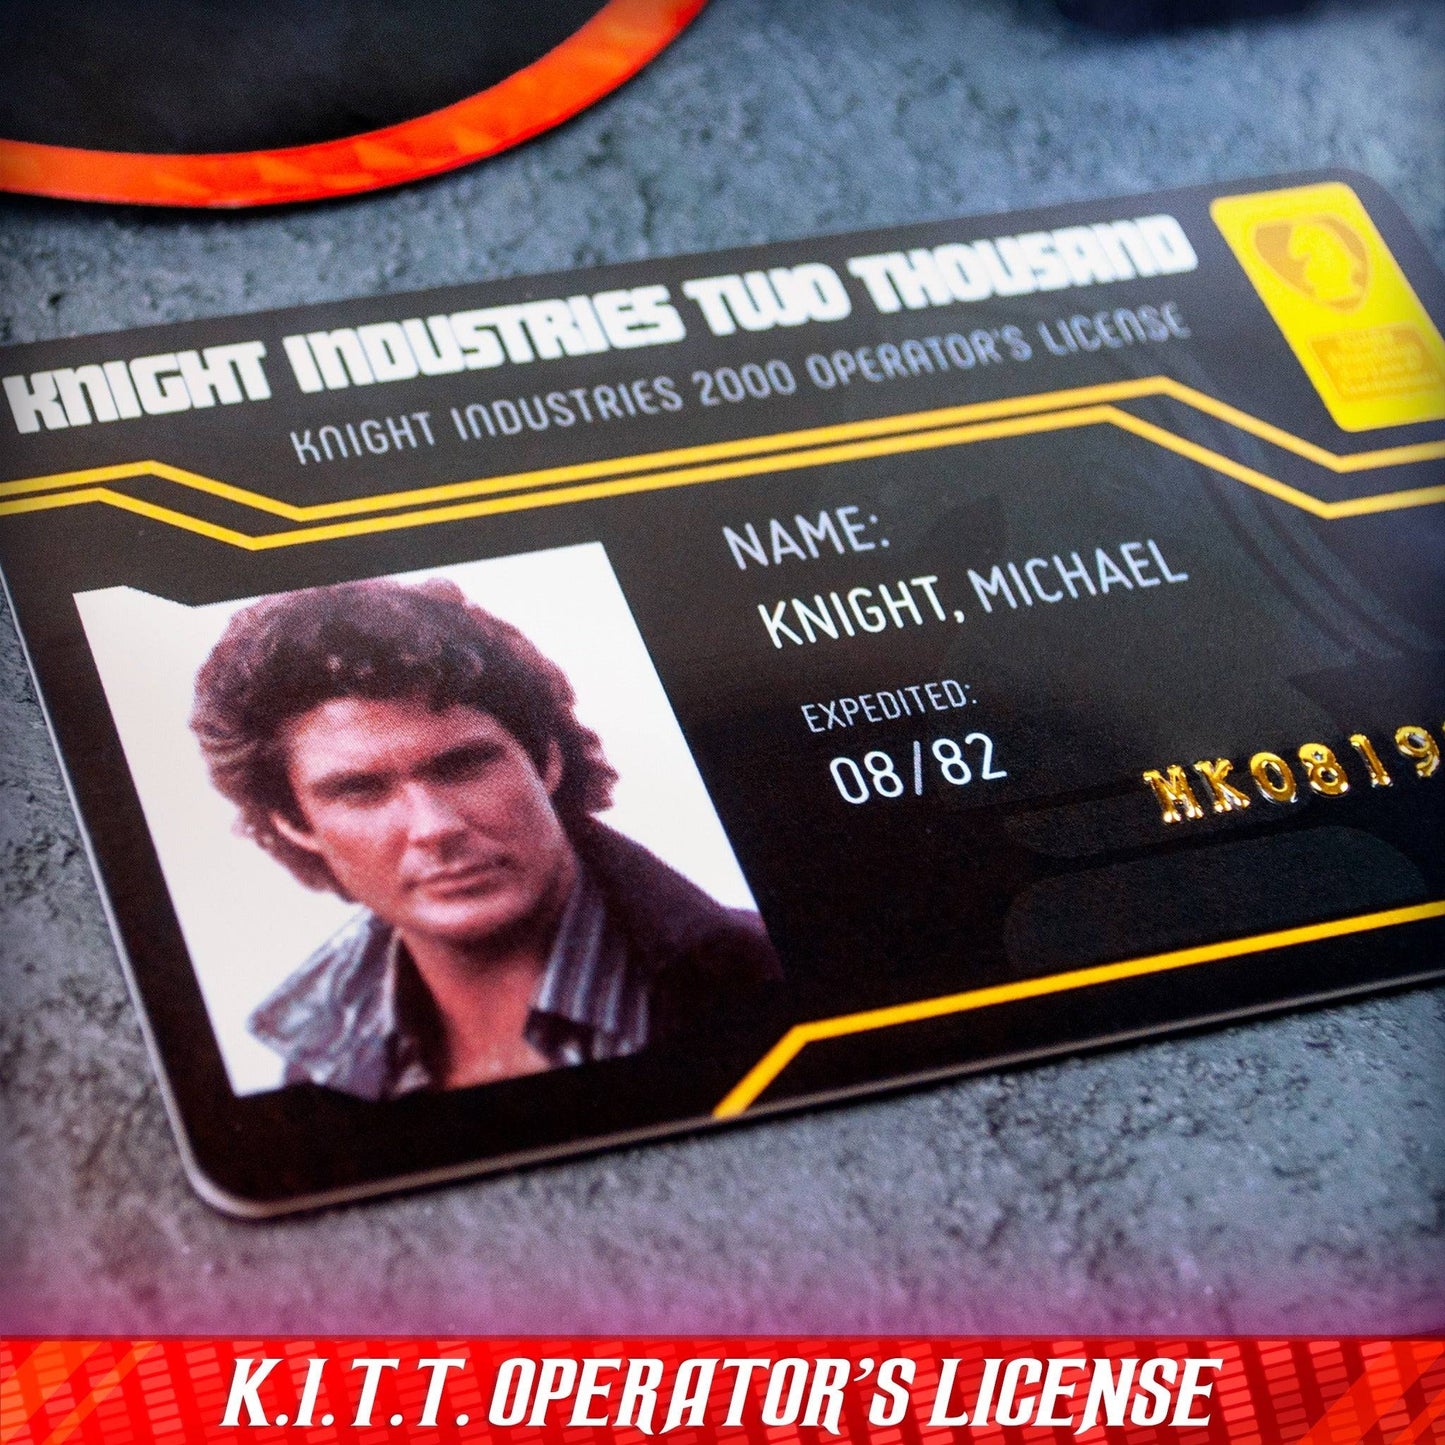 DOCTOR COLLECTOR KNIGHT RIDER F.L.A.G AGENT KIT DOCTOR COLLECTOR